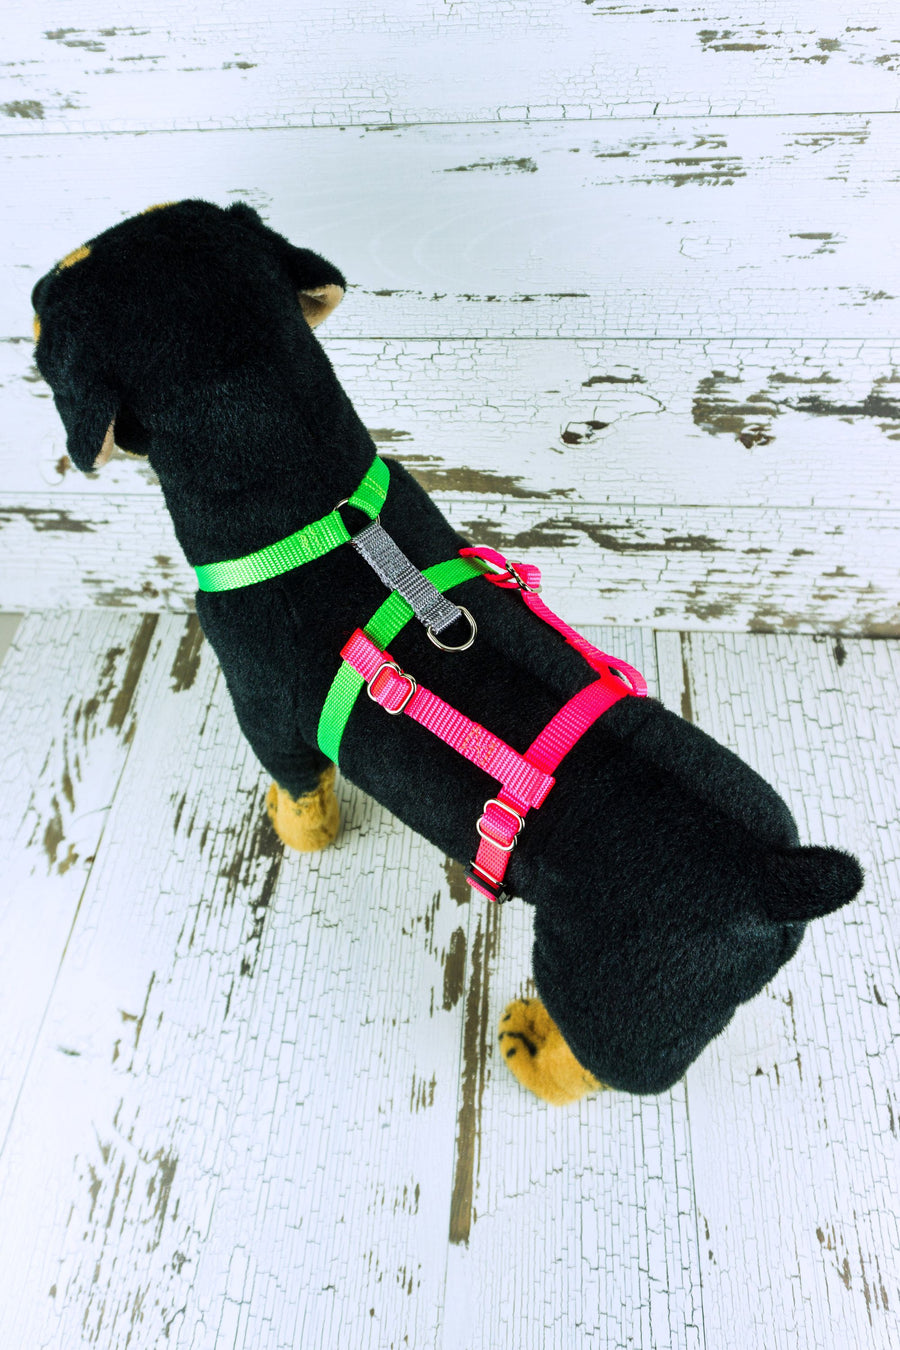 Escape Resistant Harness Add-on